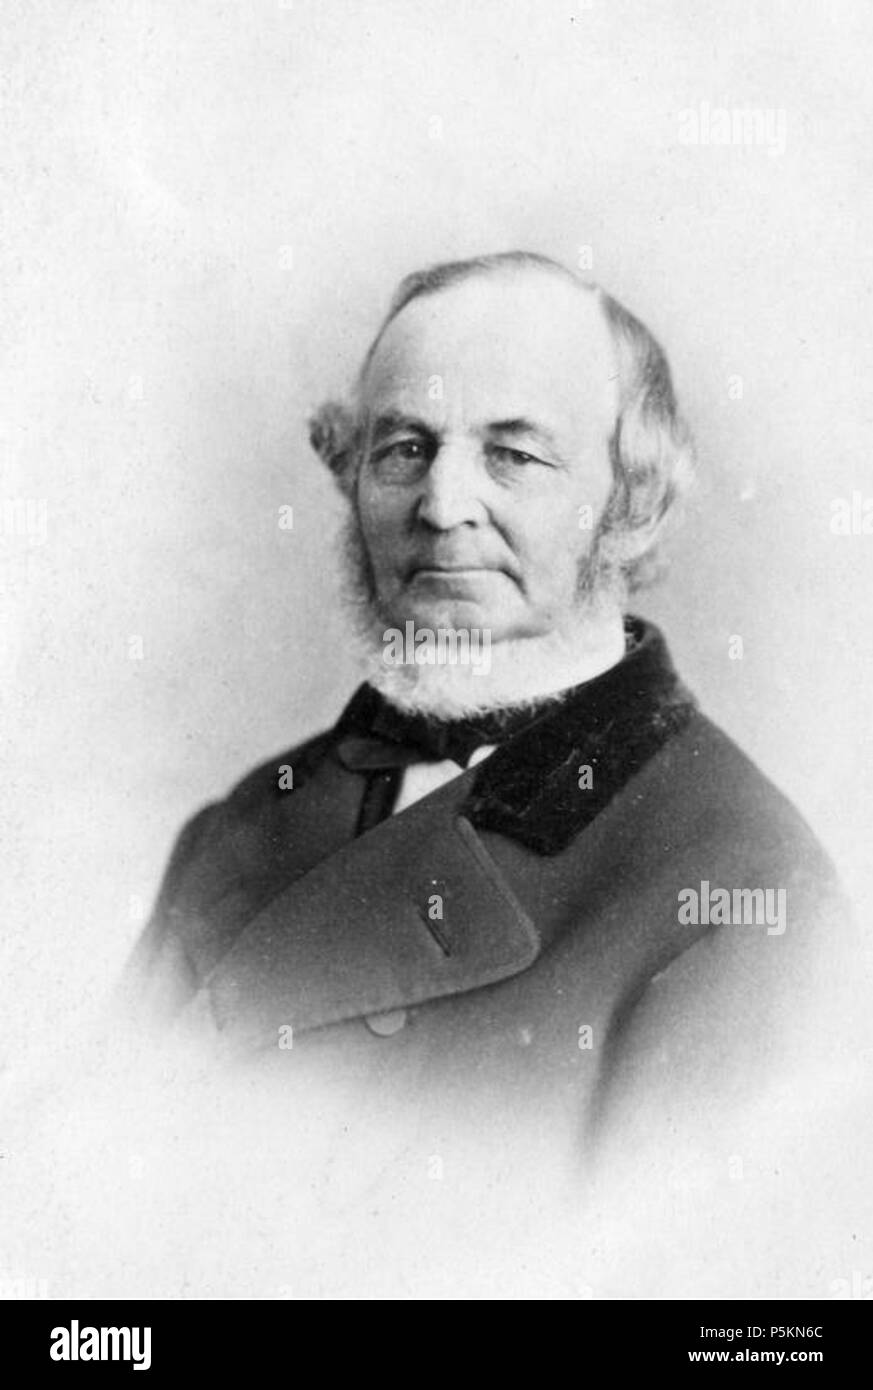 N/A. Edwin Atwater, businessperson and municipal politician, photographed by William Notman in 1868. 1868.   William Notman  (1826–1891)     Alternative names William McFarlane Notman  Description Canadian photographer and businessperson  Date of birth/death 8 March 1826 25 November 1891  Location of birth/death Paisley, Scotland Montreal, Quebec, Canada  Work location Montreal, Quebec, Canada  Authority control  : Q3495973 VIAF:66769327 ISNI:0000 0000 7370 7964 ULAN:500023579 LCCN:n85325240 Open Library:OL5301228A WorldCat 495 EdwinAtwater1868byNotman Stock Photo